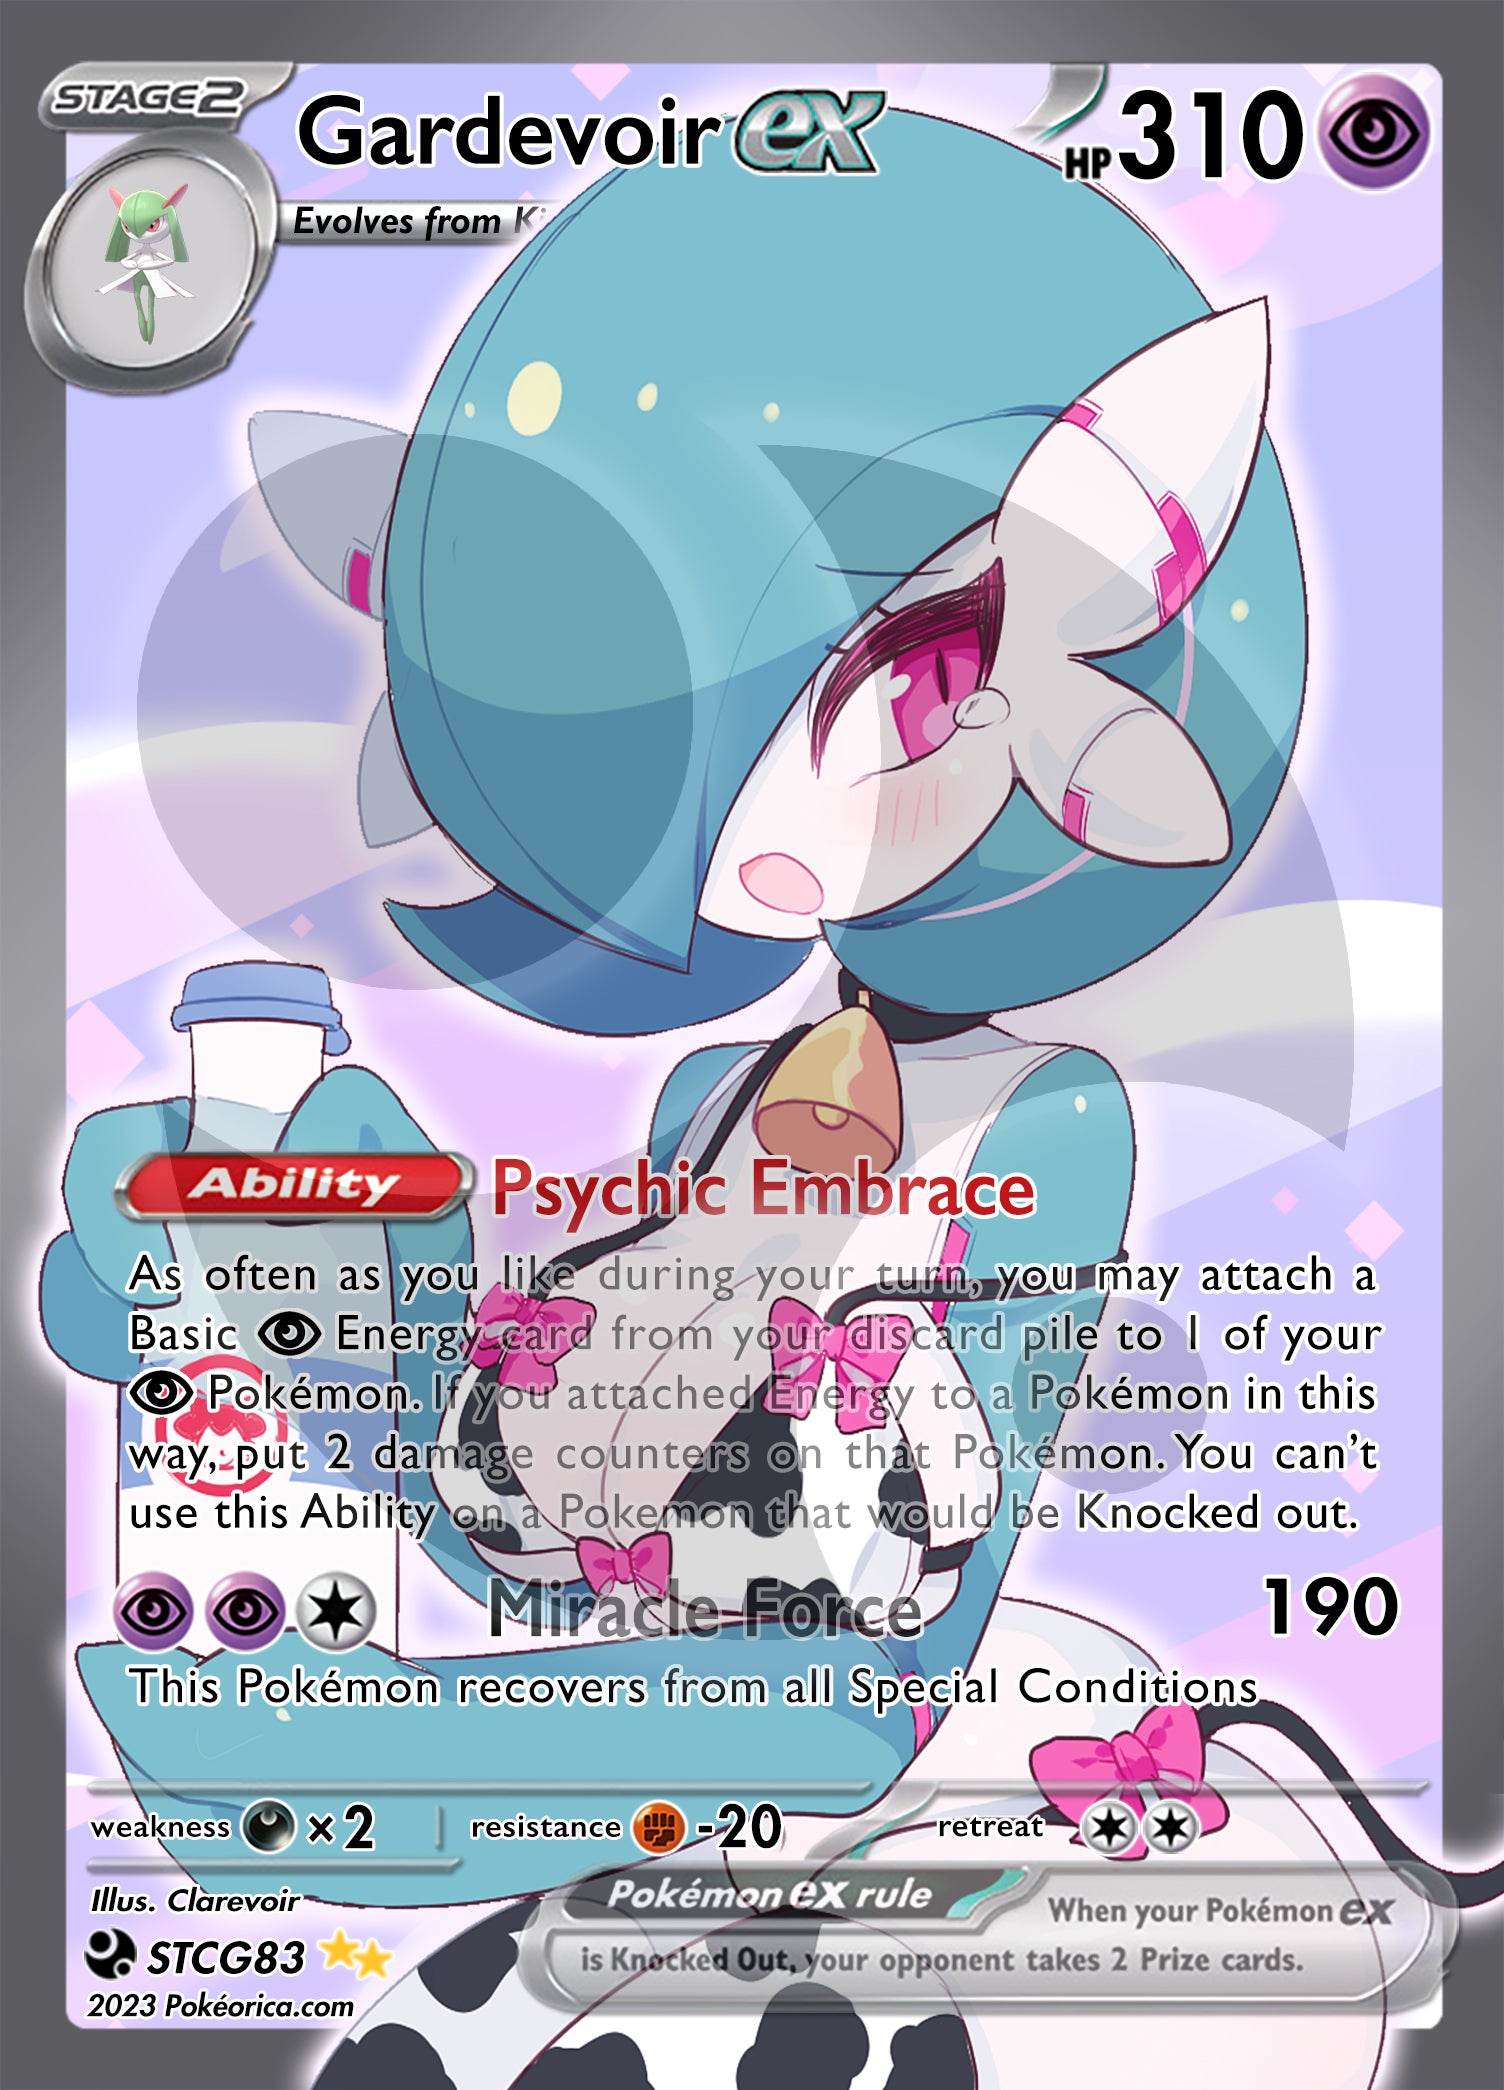 Another custom card, This time it's Mega Gardevoir